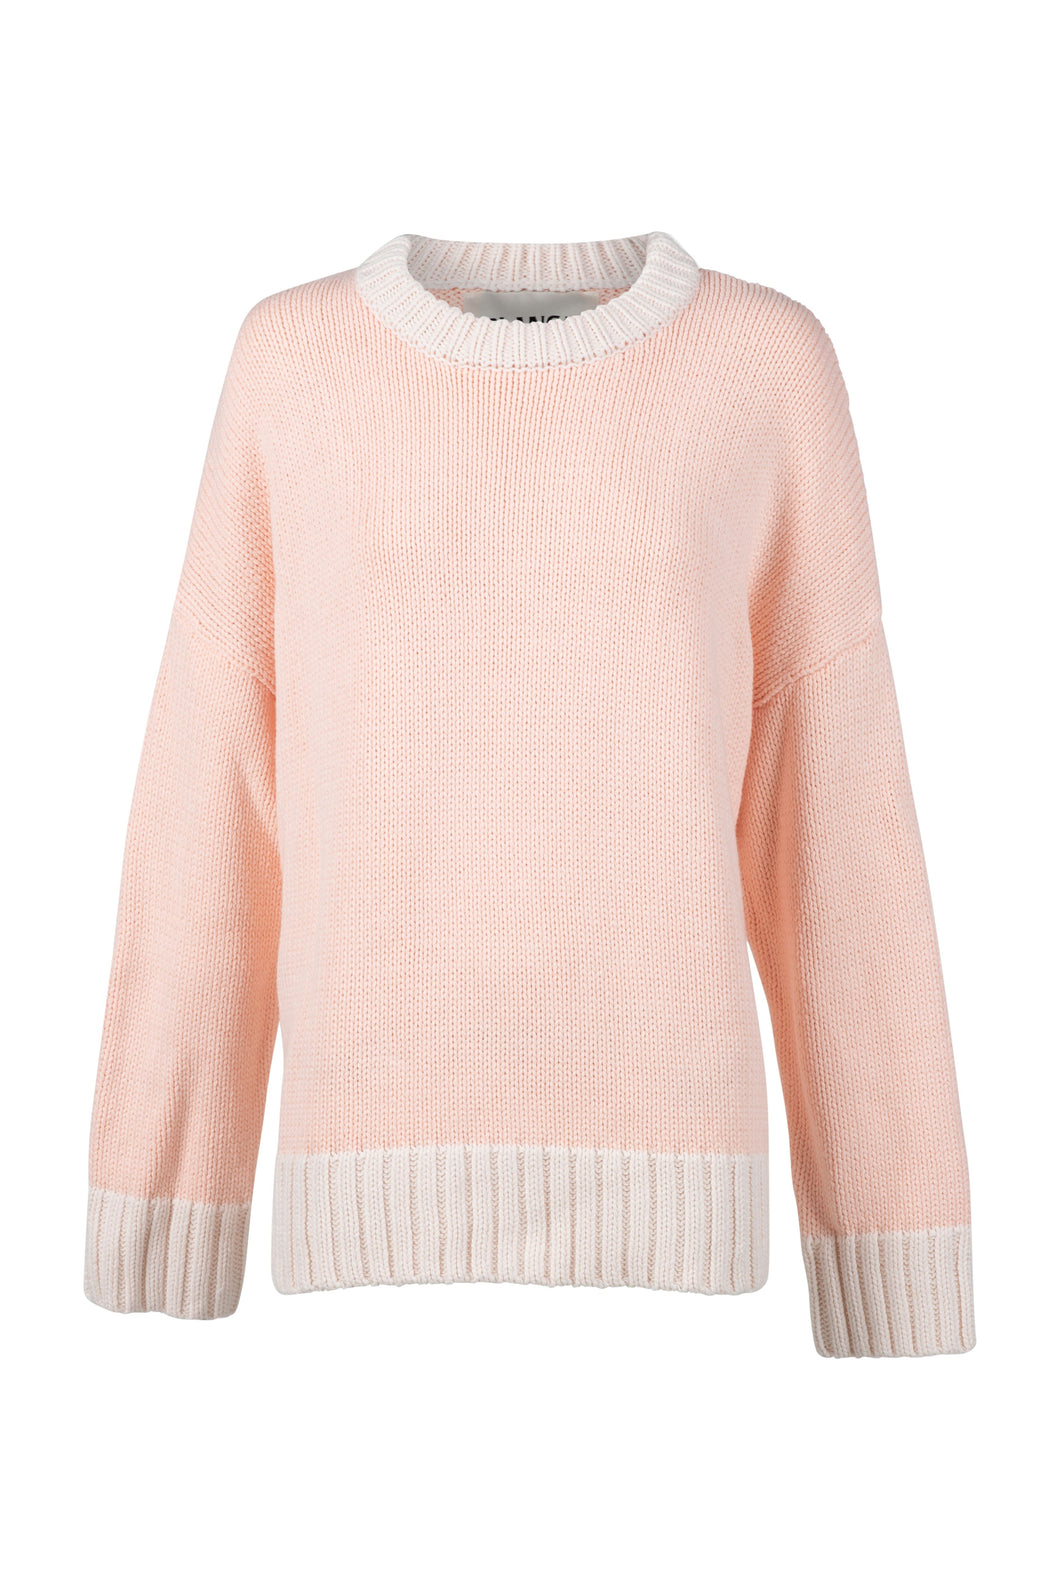 Chambord Knit in Pale Pink